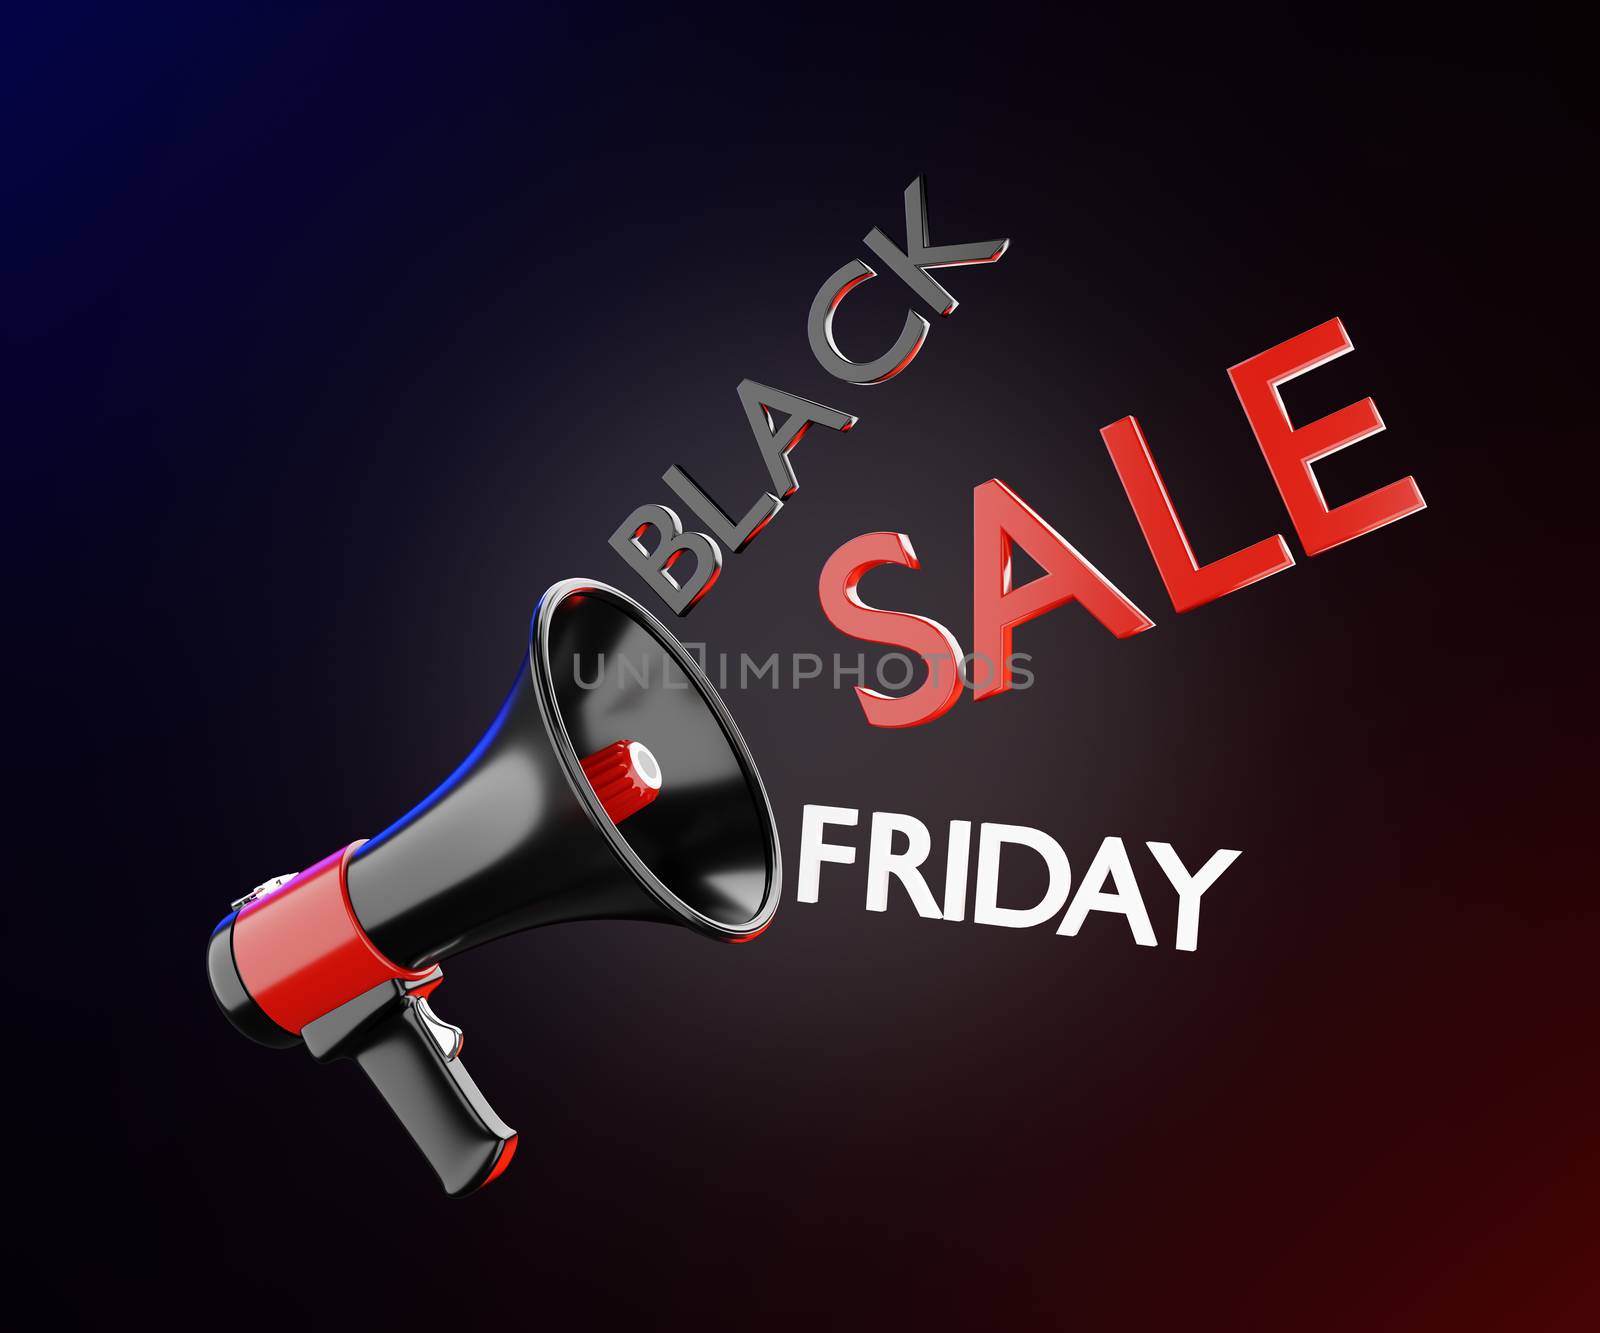 Megaphones are announcing about the Black Friday Festival in a black background with beautiful blue and red lights. Concept of the shopping season on weekends of November every year. 3D rendering.